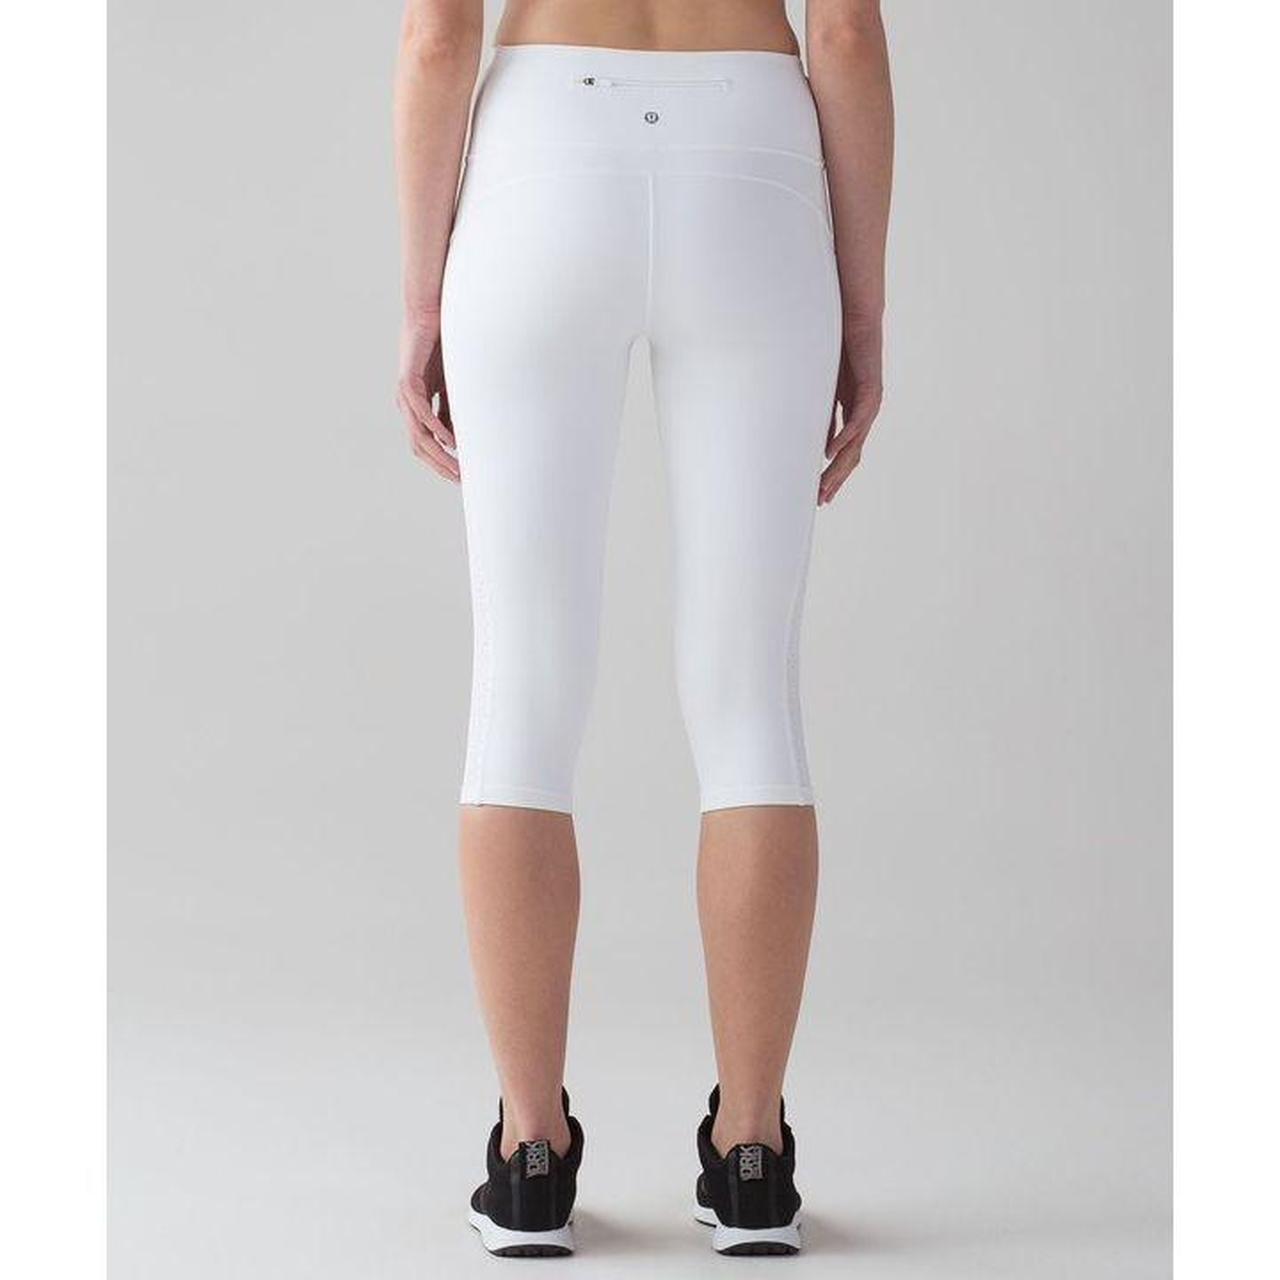 Stay Comfortable and Stylish with the White Lululemon Mind Over Miles Crop  17